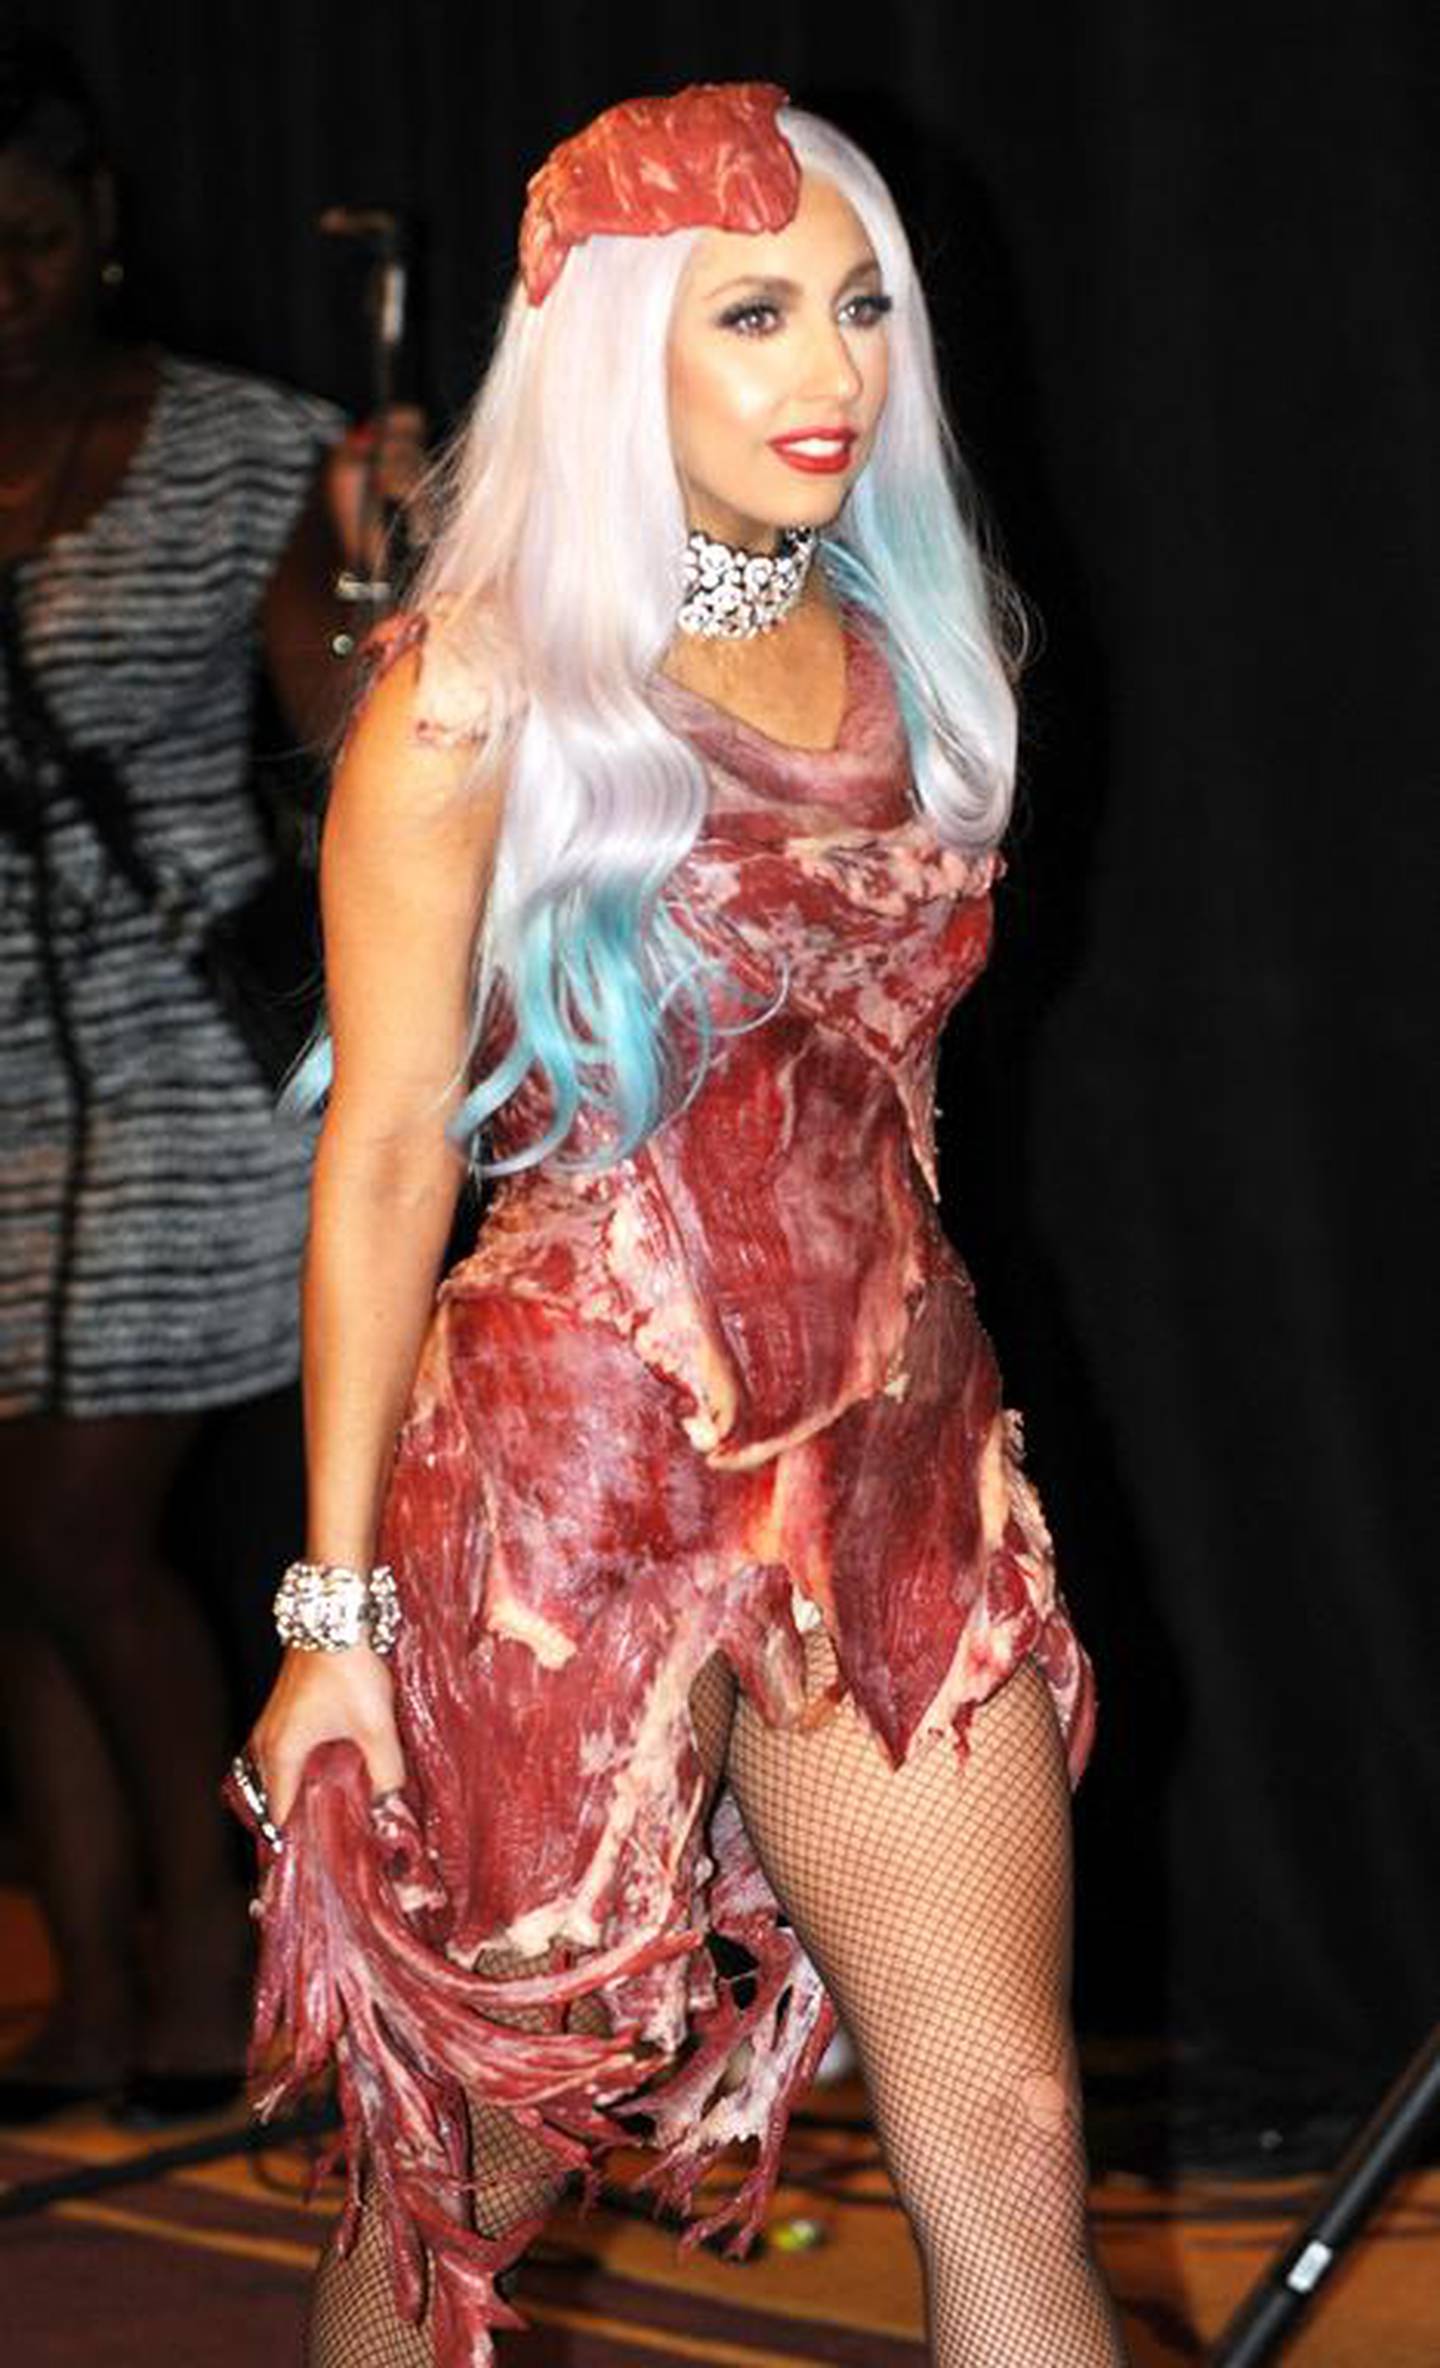 Lady Gaga wears her controversial meat dress in 2010. AFP